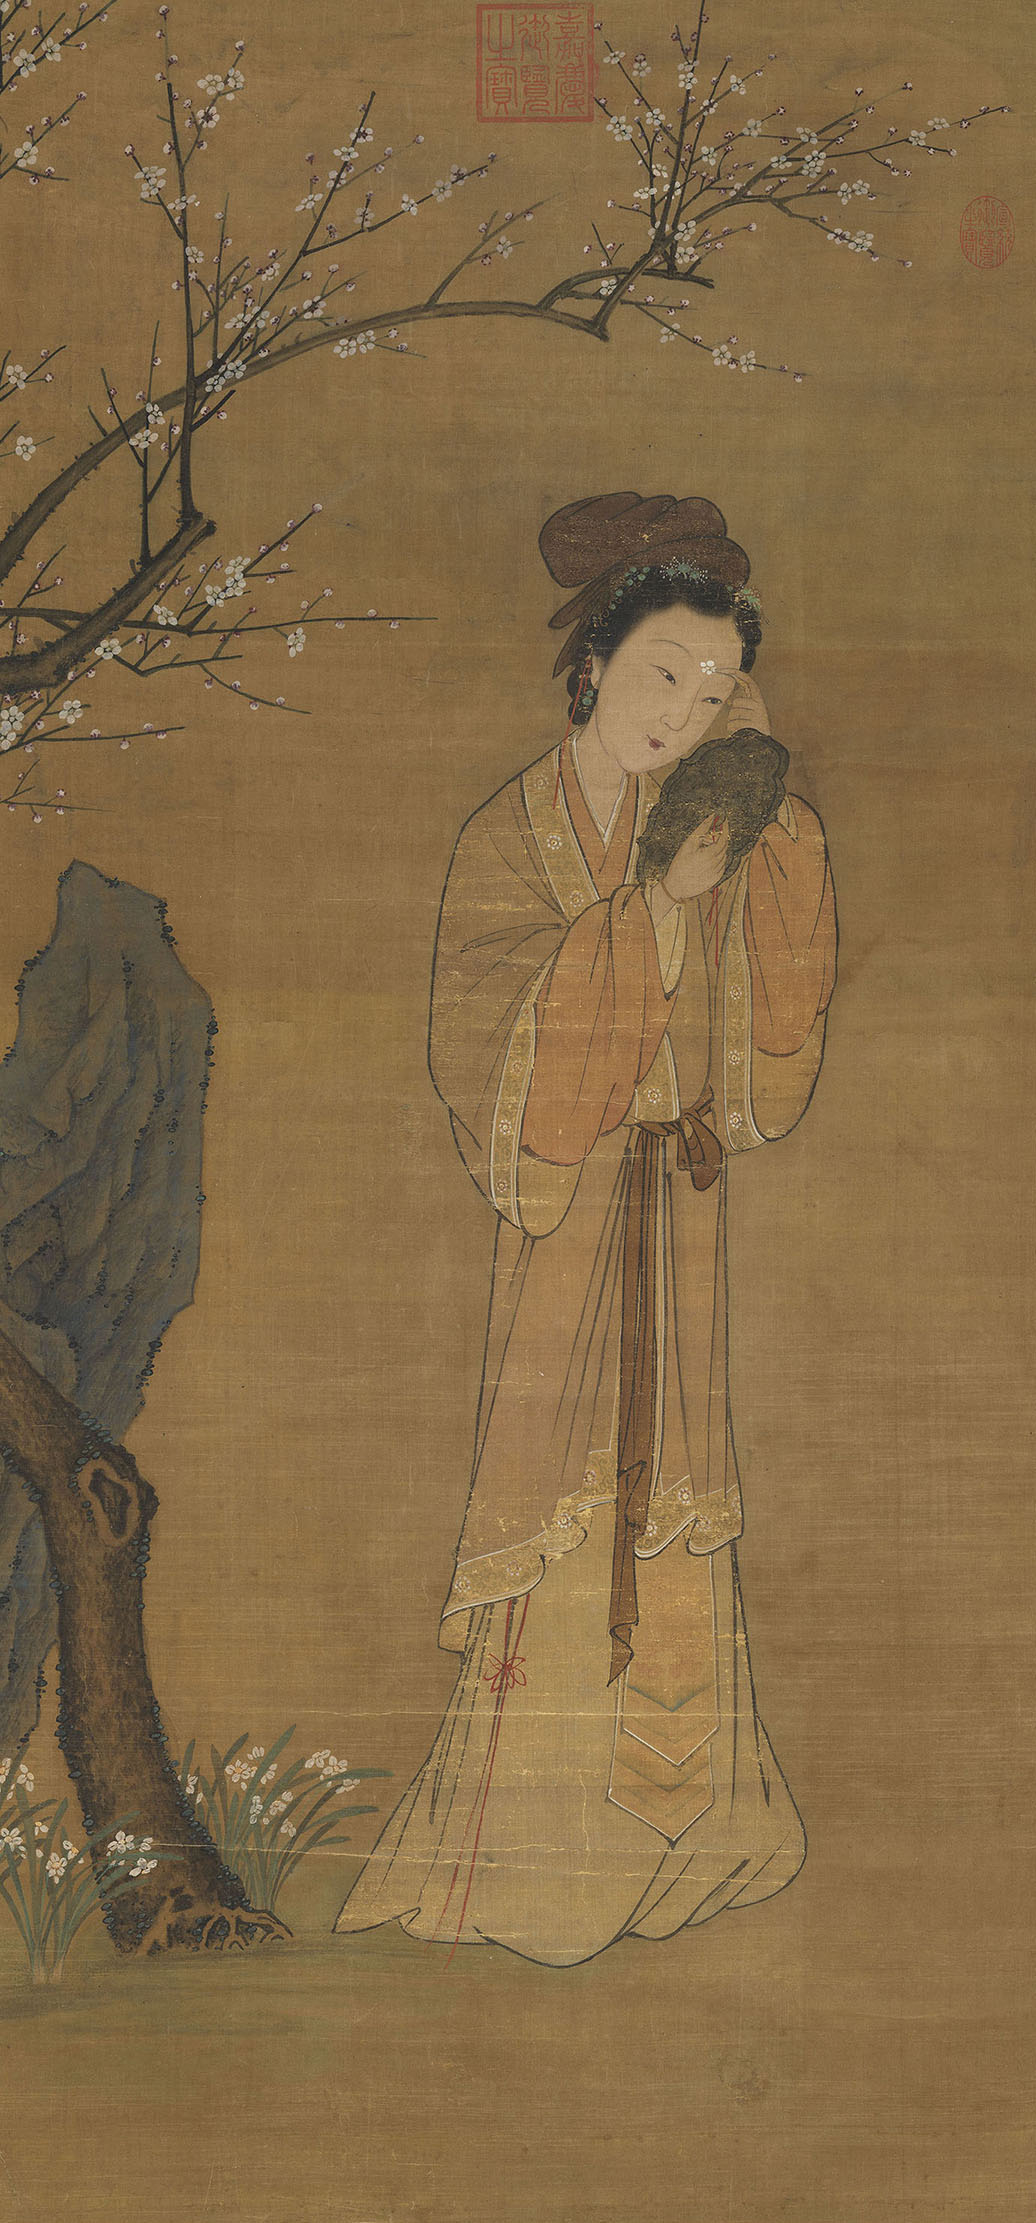 Lady and Plum Blossoms